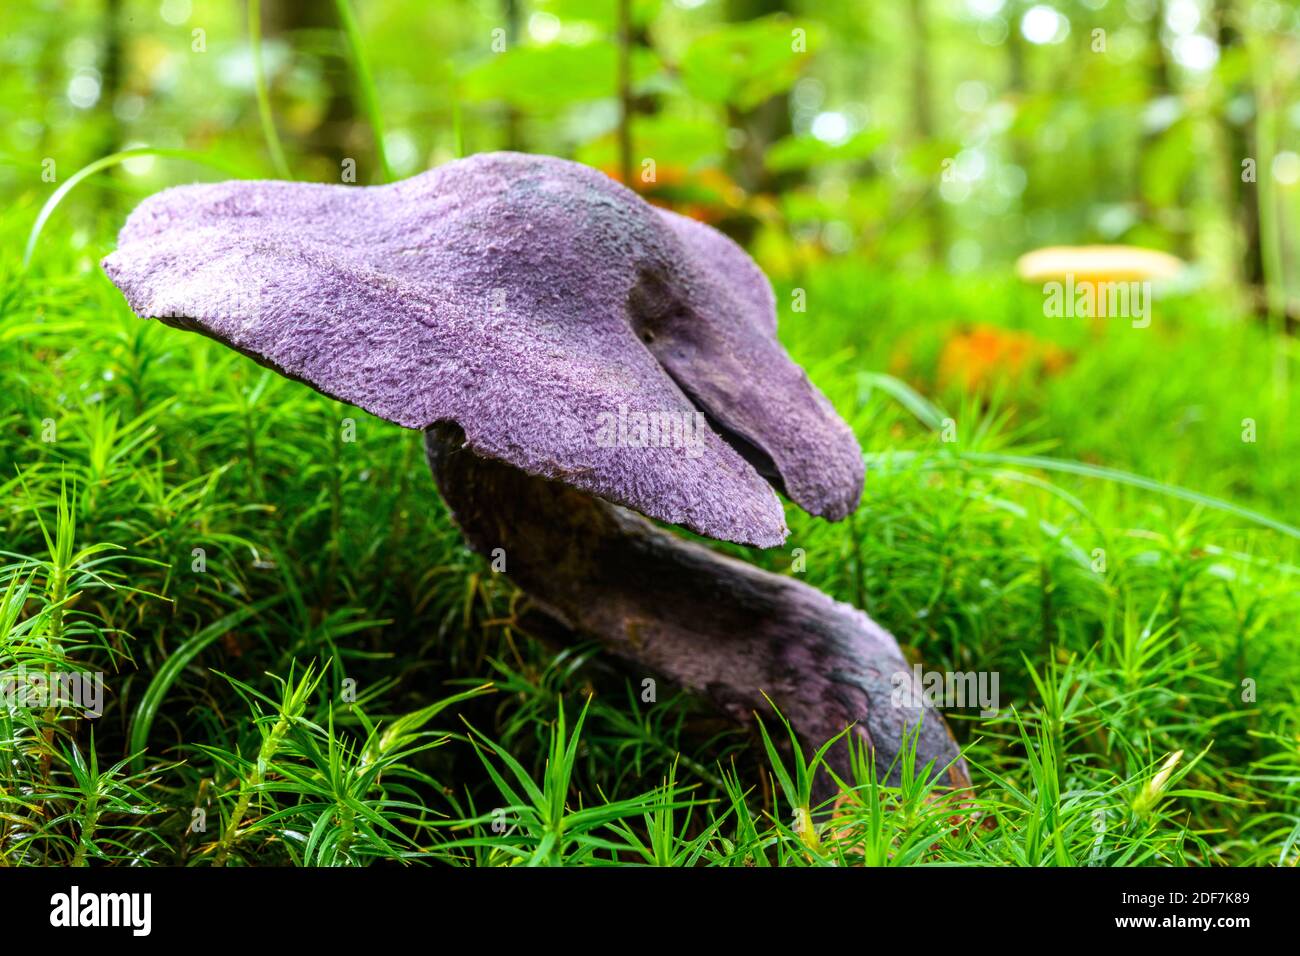 France, Somme (80), Cr?cy-en-Ponthieu, Cr?cy forest, Mushroom, Cortinarius violaceus Stock Photo